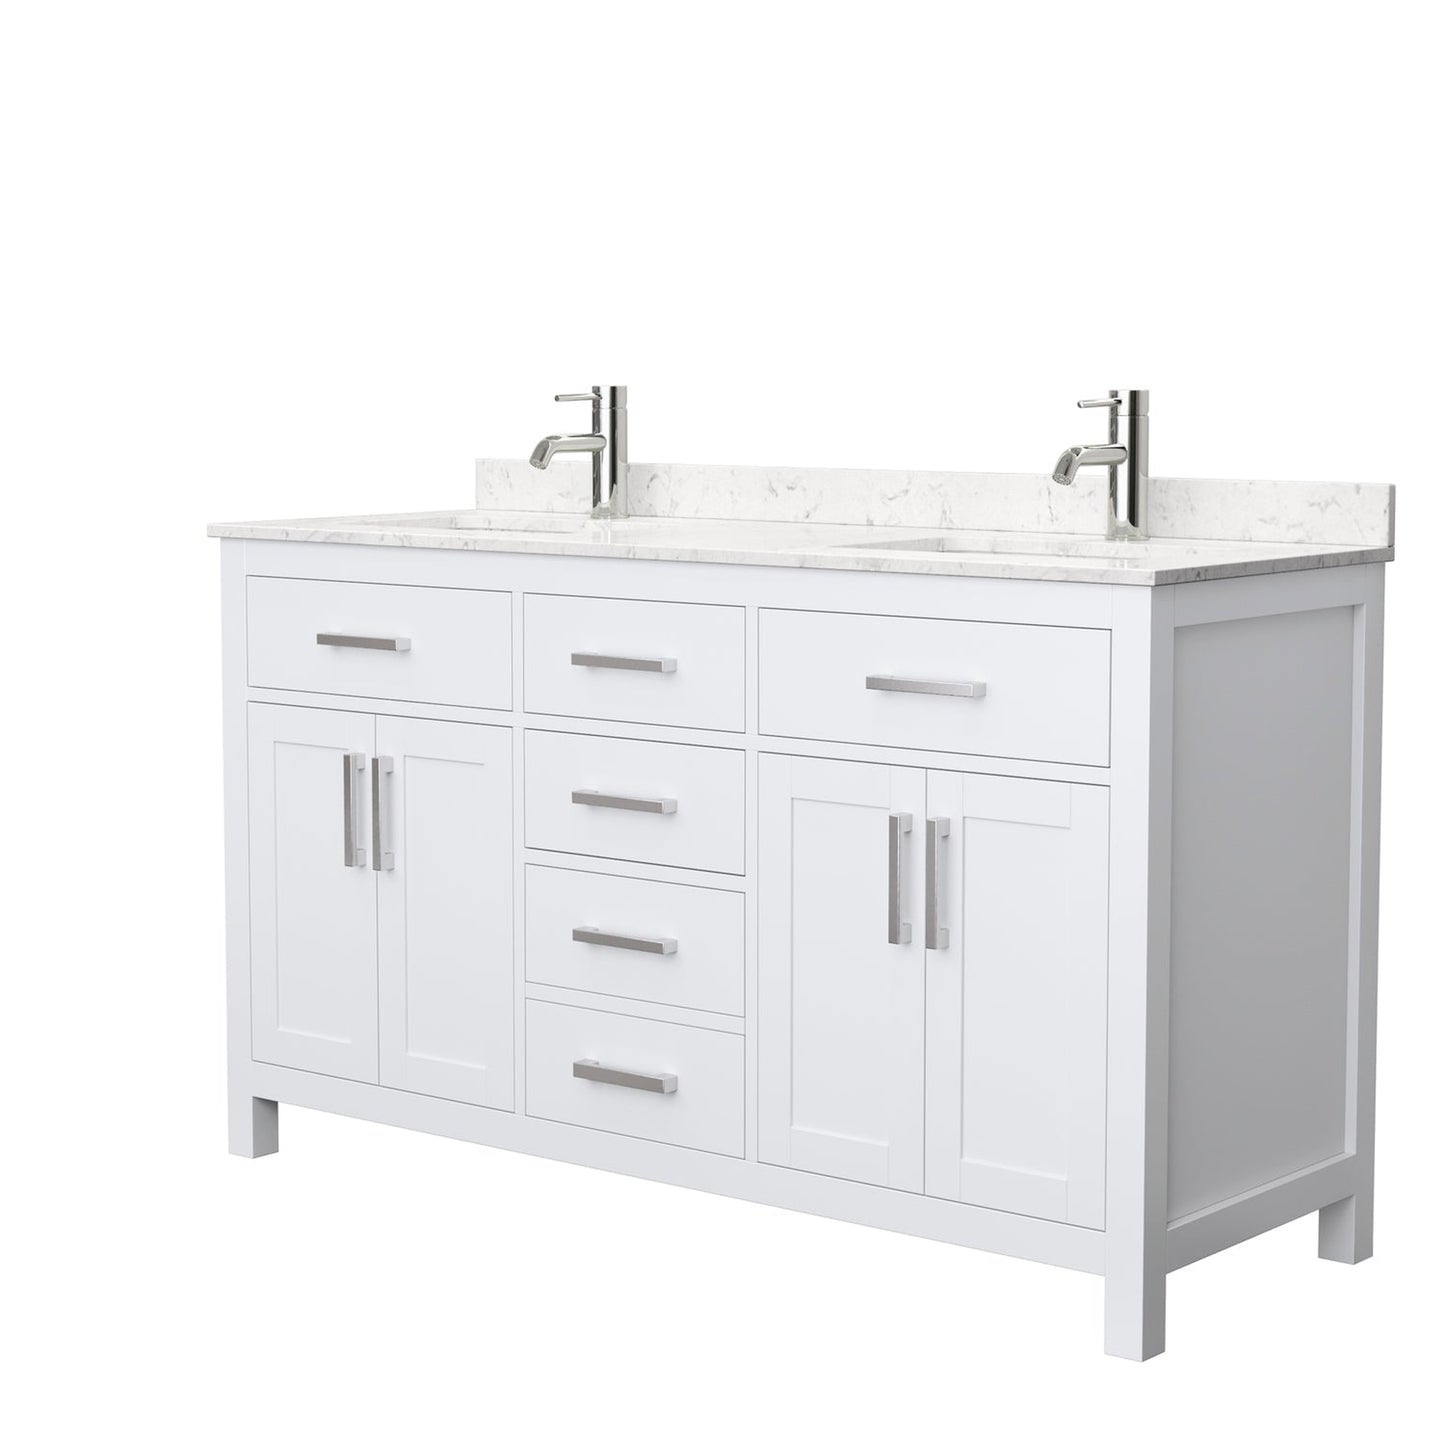 Wyndham Collection Beckett 60" Double Bathroom White Vanity With White Carrara Cultured Marble Countertop, Undermount Square Sink And Brushed Nickel Trim